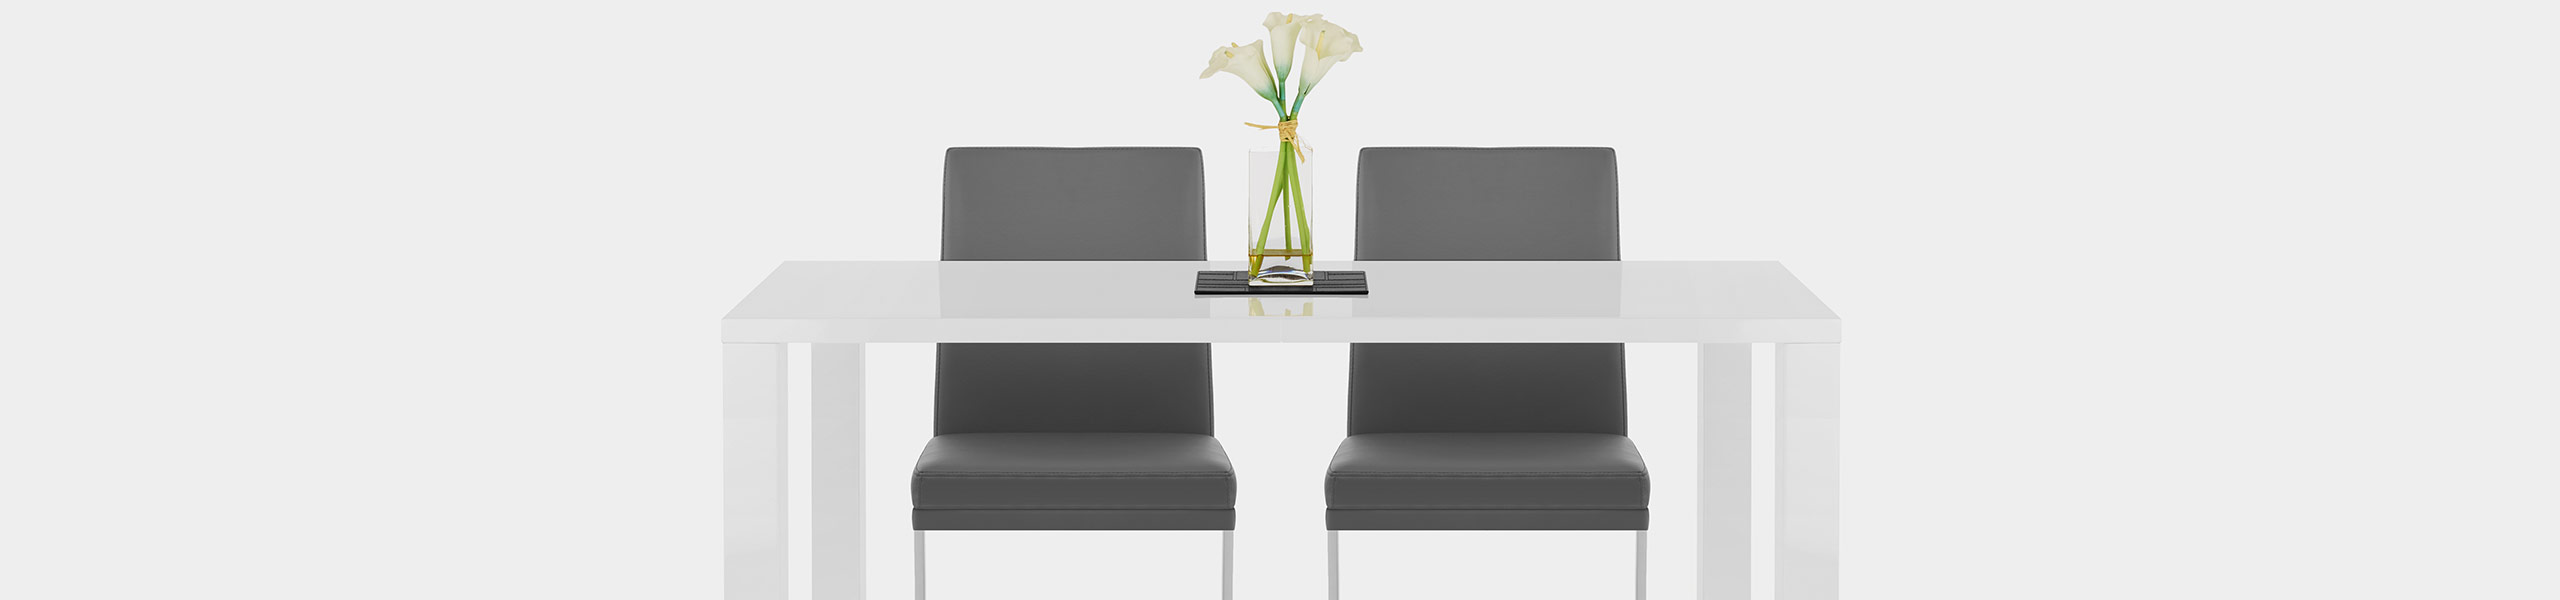 Jade Dining Chair Grey Video Banner